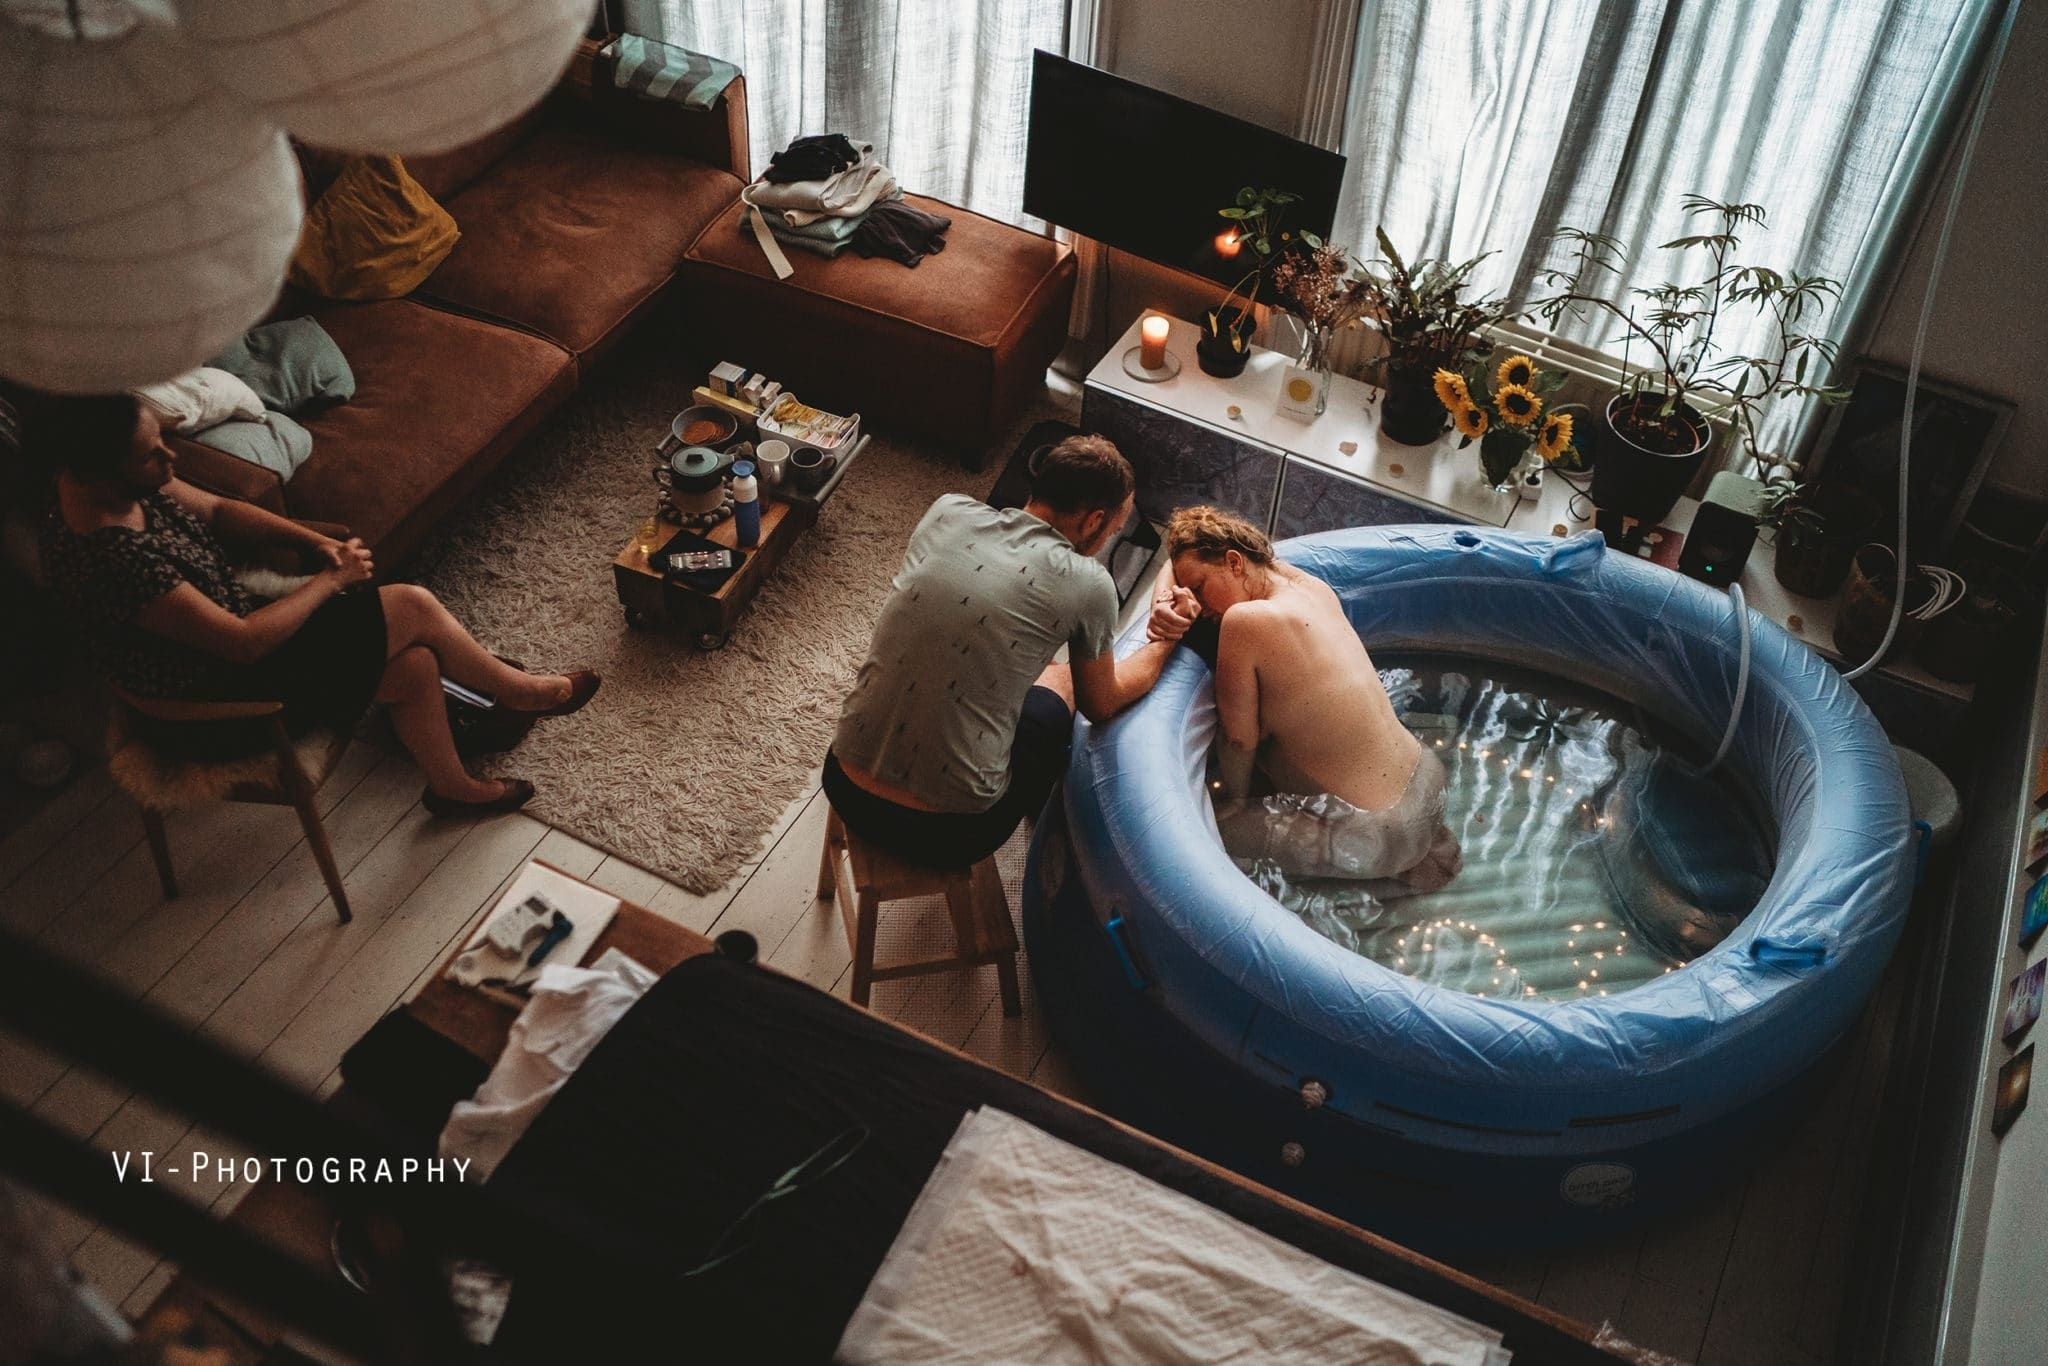 A woman sits in a tub of water setup in the living room as her husband holds her hand